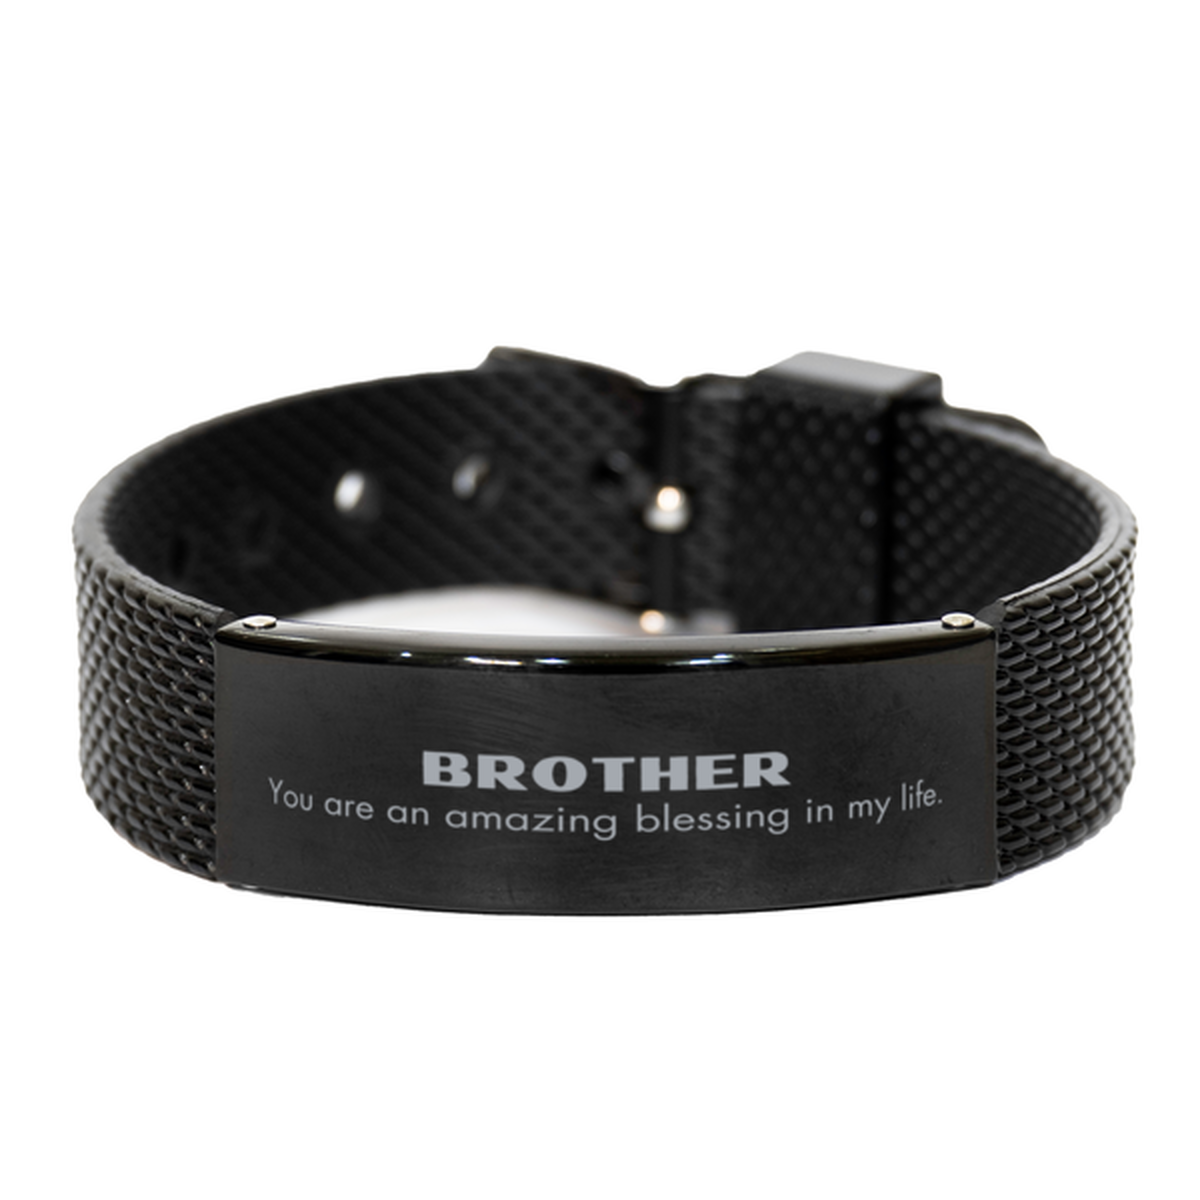 Brother Black Shark Mesh Bracelet, You are an amazing blessing in my life, Thank You Gifts For Brother, Inspirational Birthday Christmas Unique Gifts For Brother